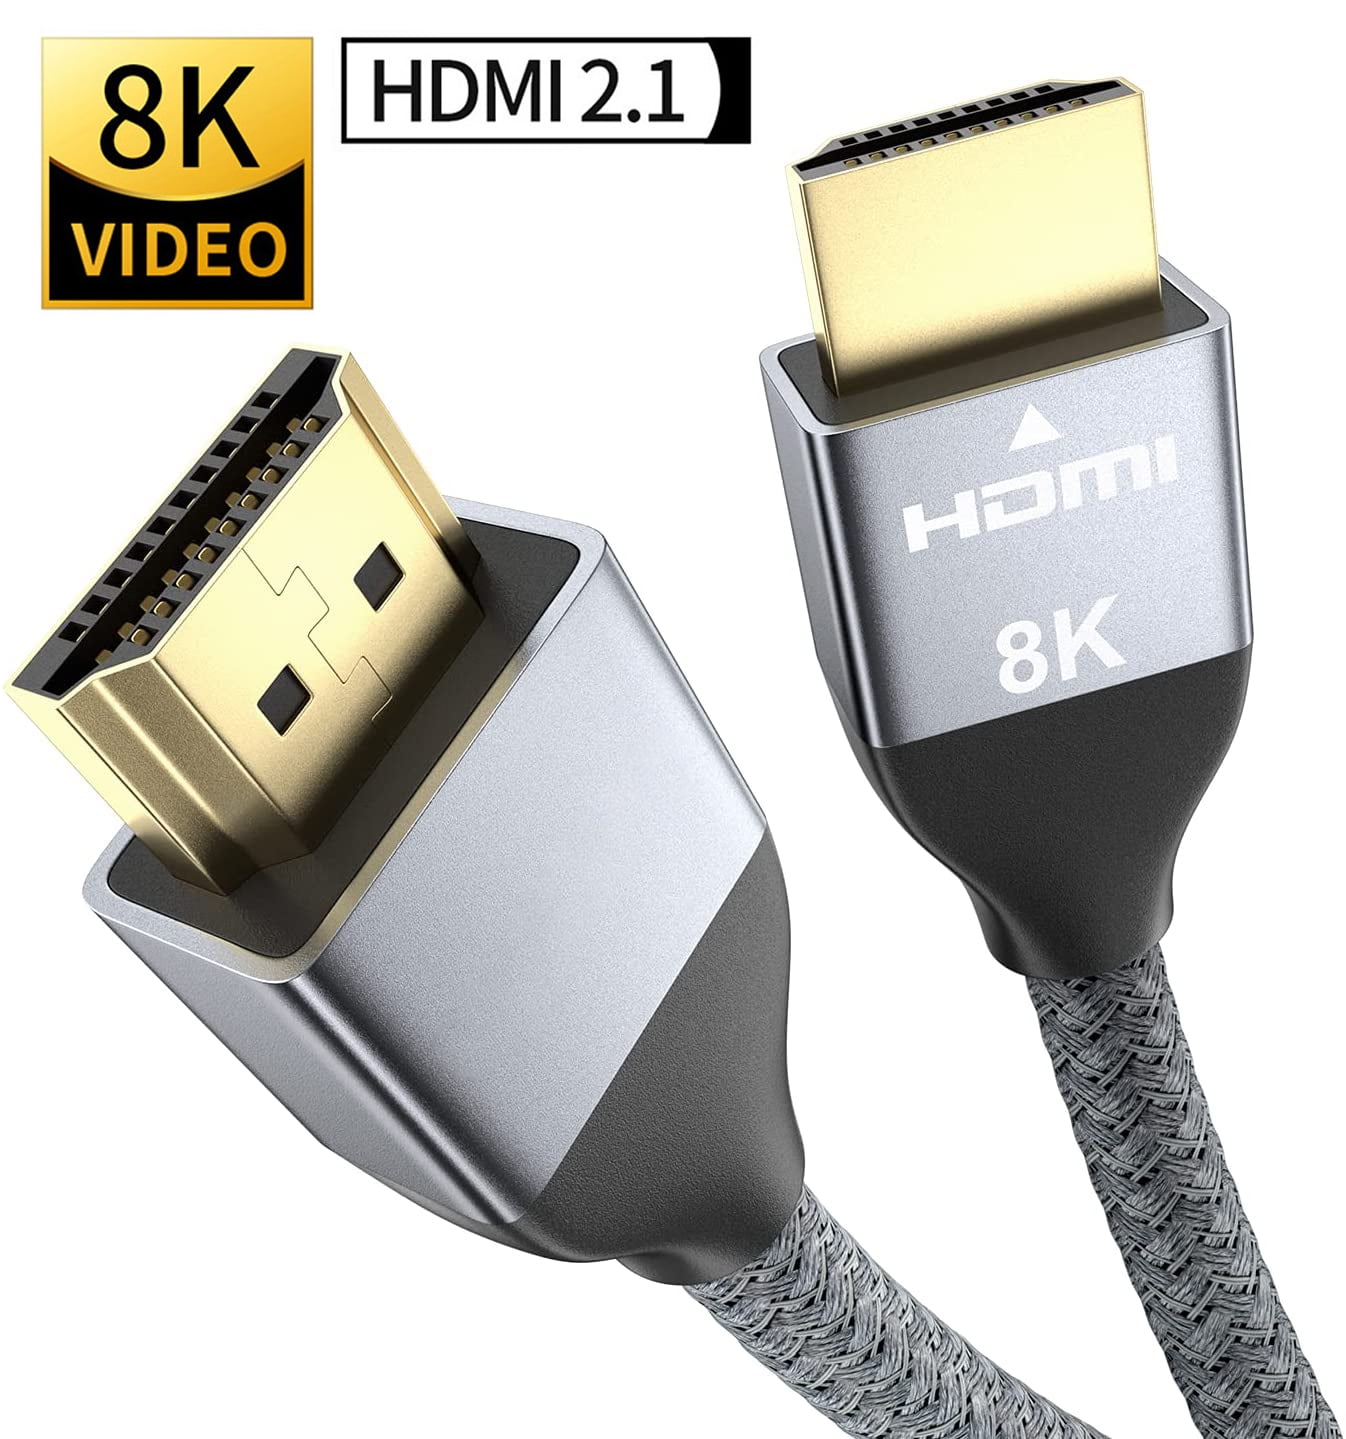 Certified Ultra High Speed HDMI 2.1 Cable 8K@60/4K@120 48Gbps for PS5/Xbox  X Lot